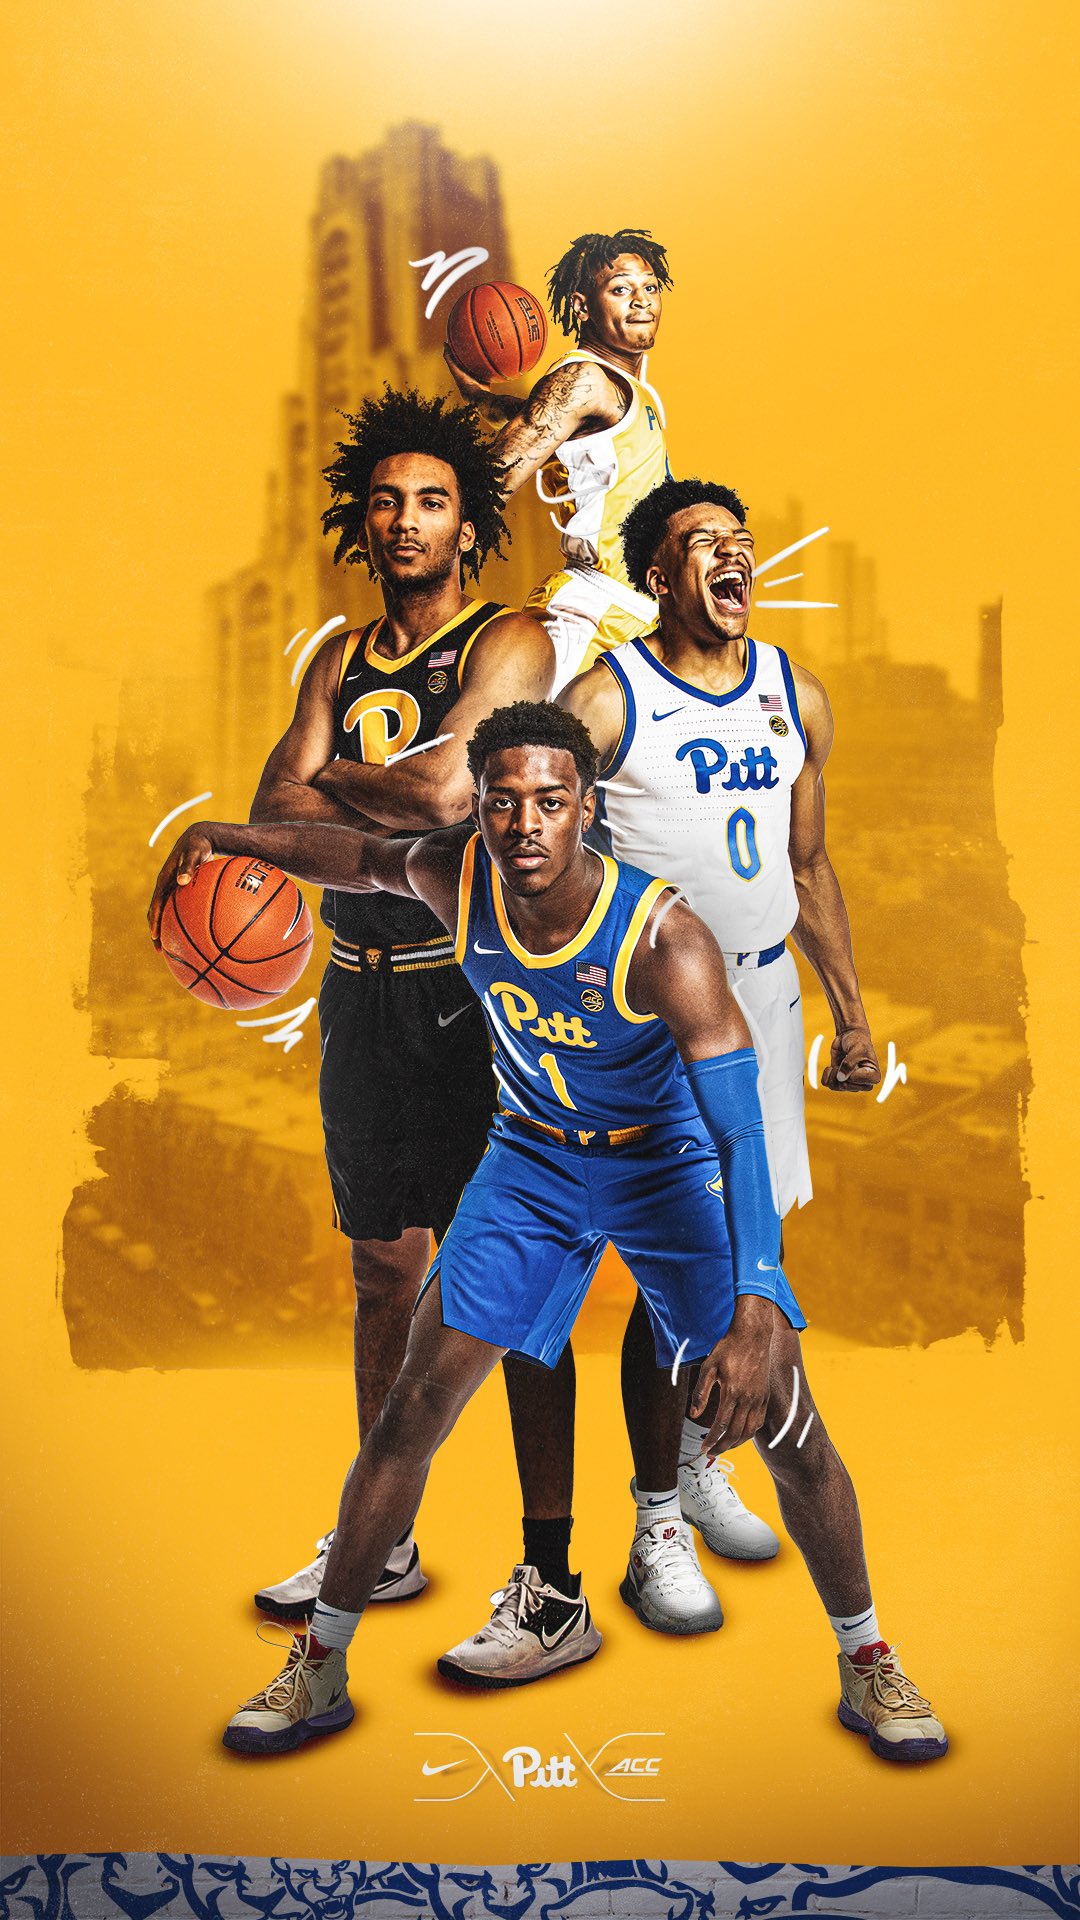 Free download Wallpaper Mobile and Desktop Pitt Panthers H2P [1080x1920] for your Desktop, Mobile & Tablet. Explore Wallpaper Basketball. Basketball Wallpaper, Basketball Background, Basketball Background